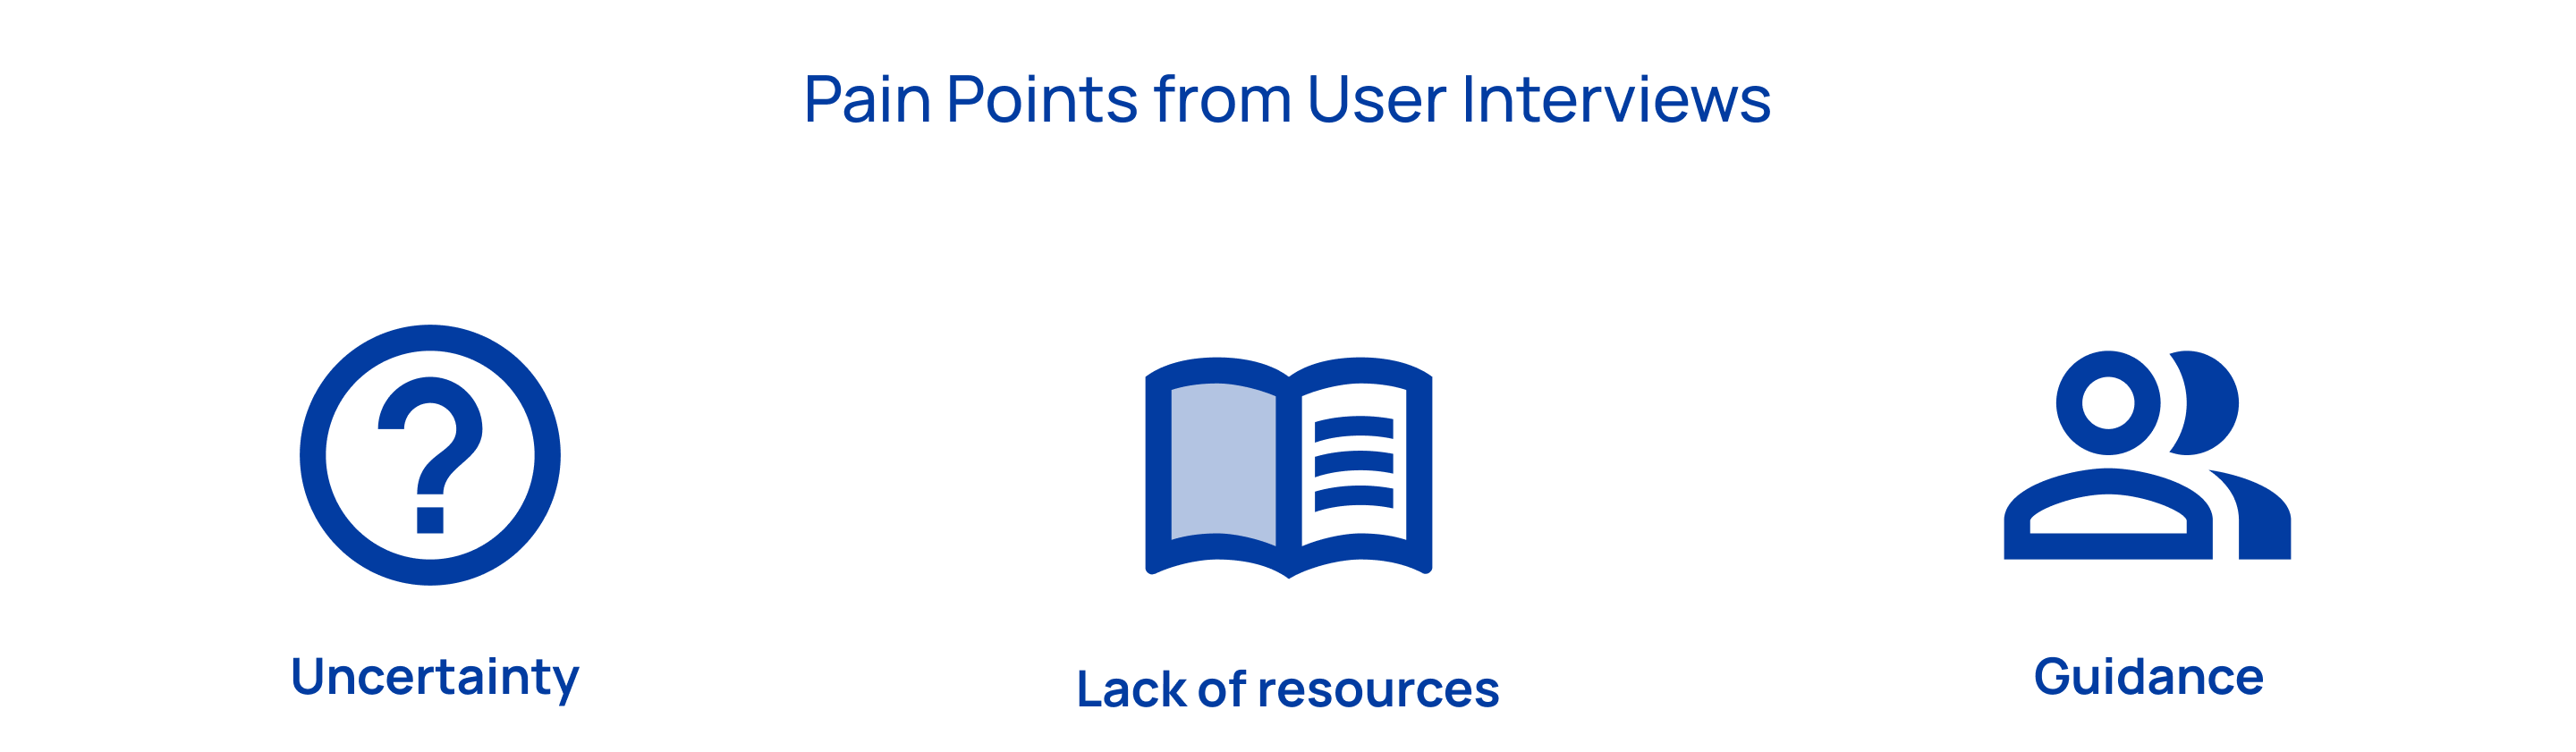 User pain points: uncertainty, lack of resources, lack of guidance